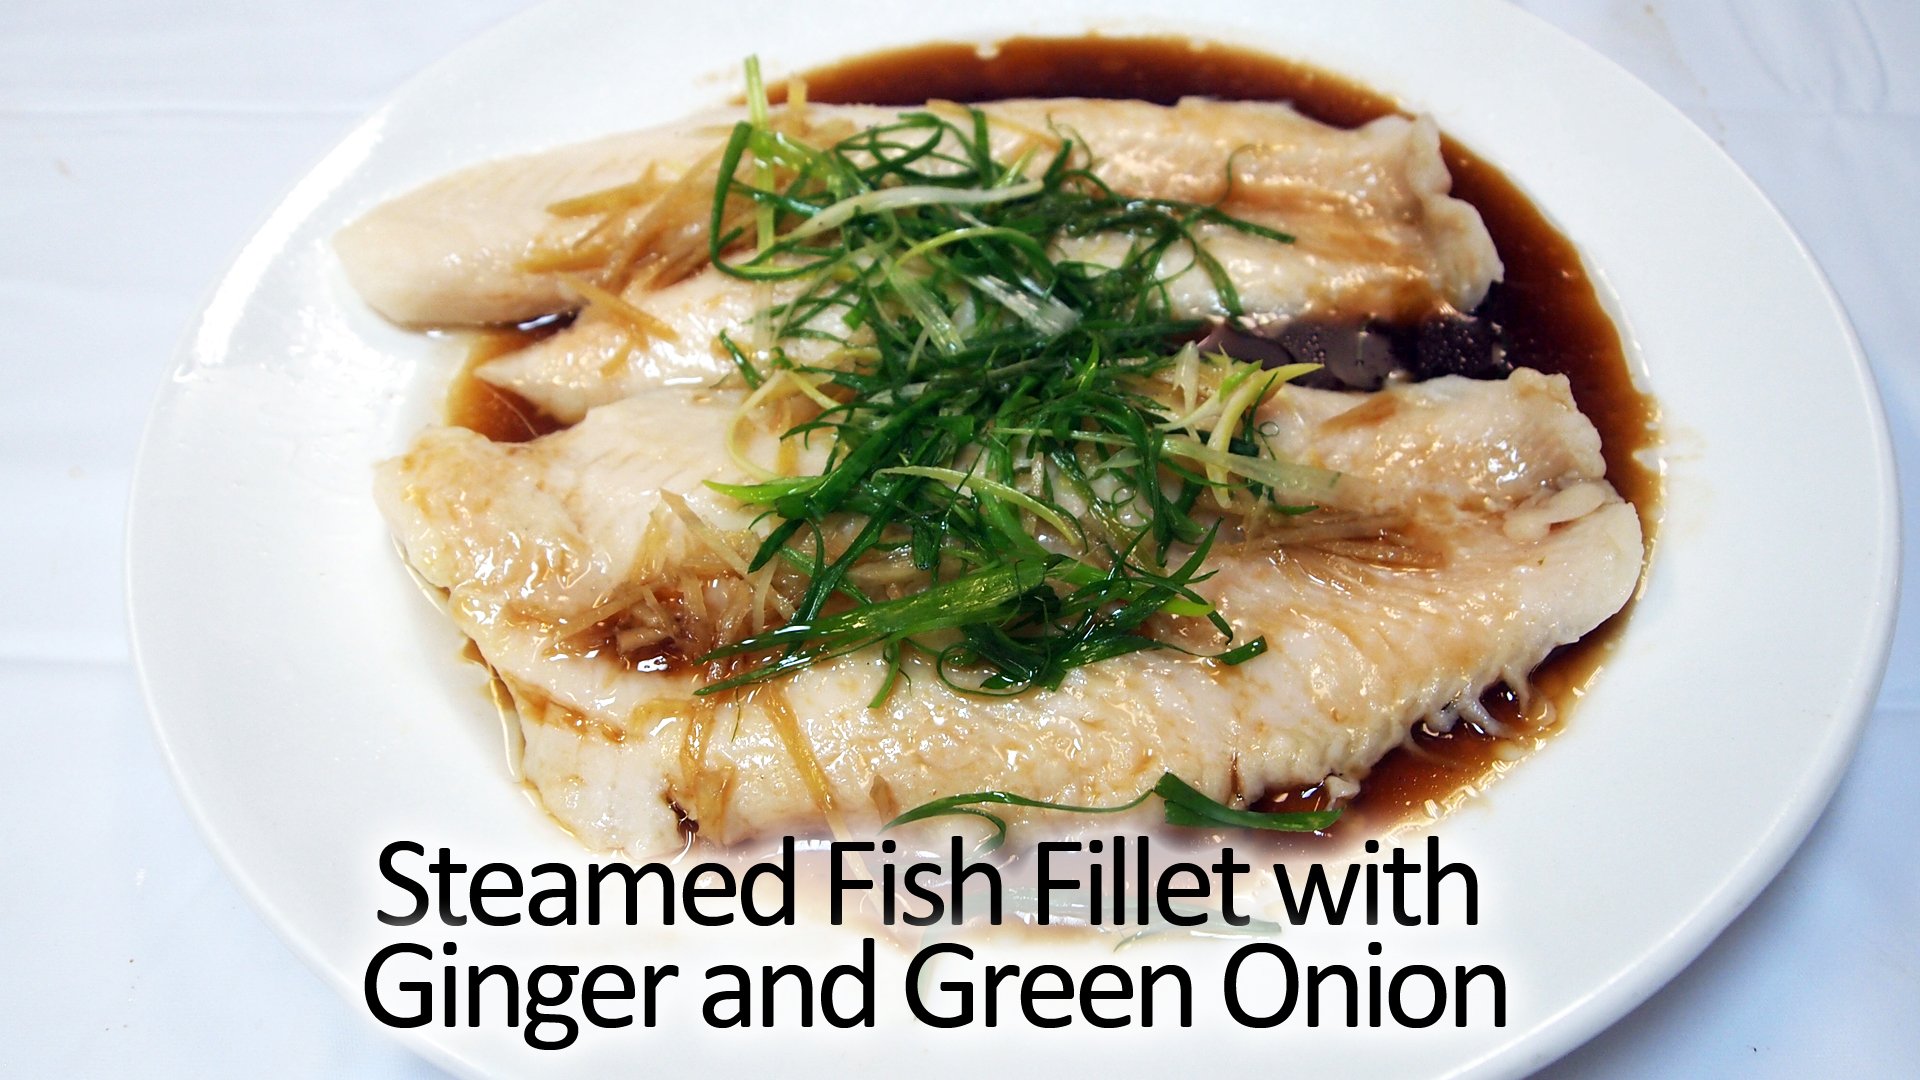 Steamed Fish Fillet with Ginger and Green Onion 1.jpeg